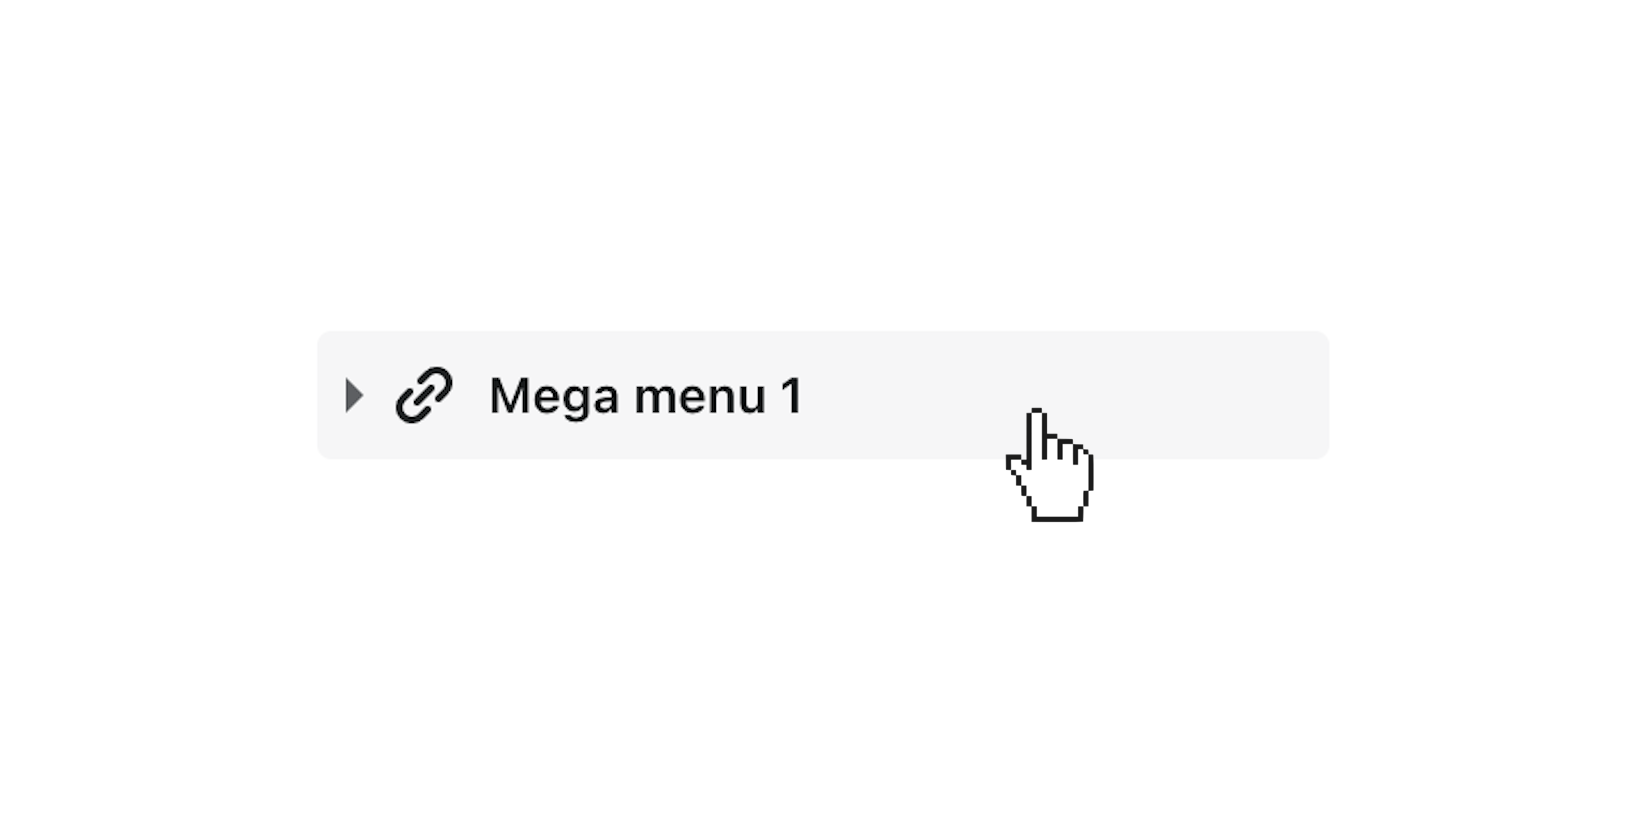 click_first_mega_menu_section_to_customize_its_settings.png